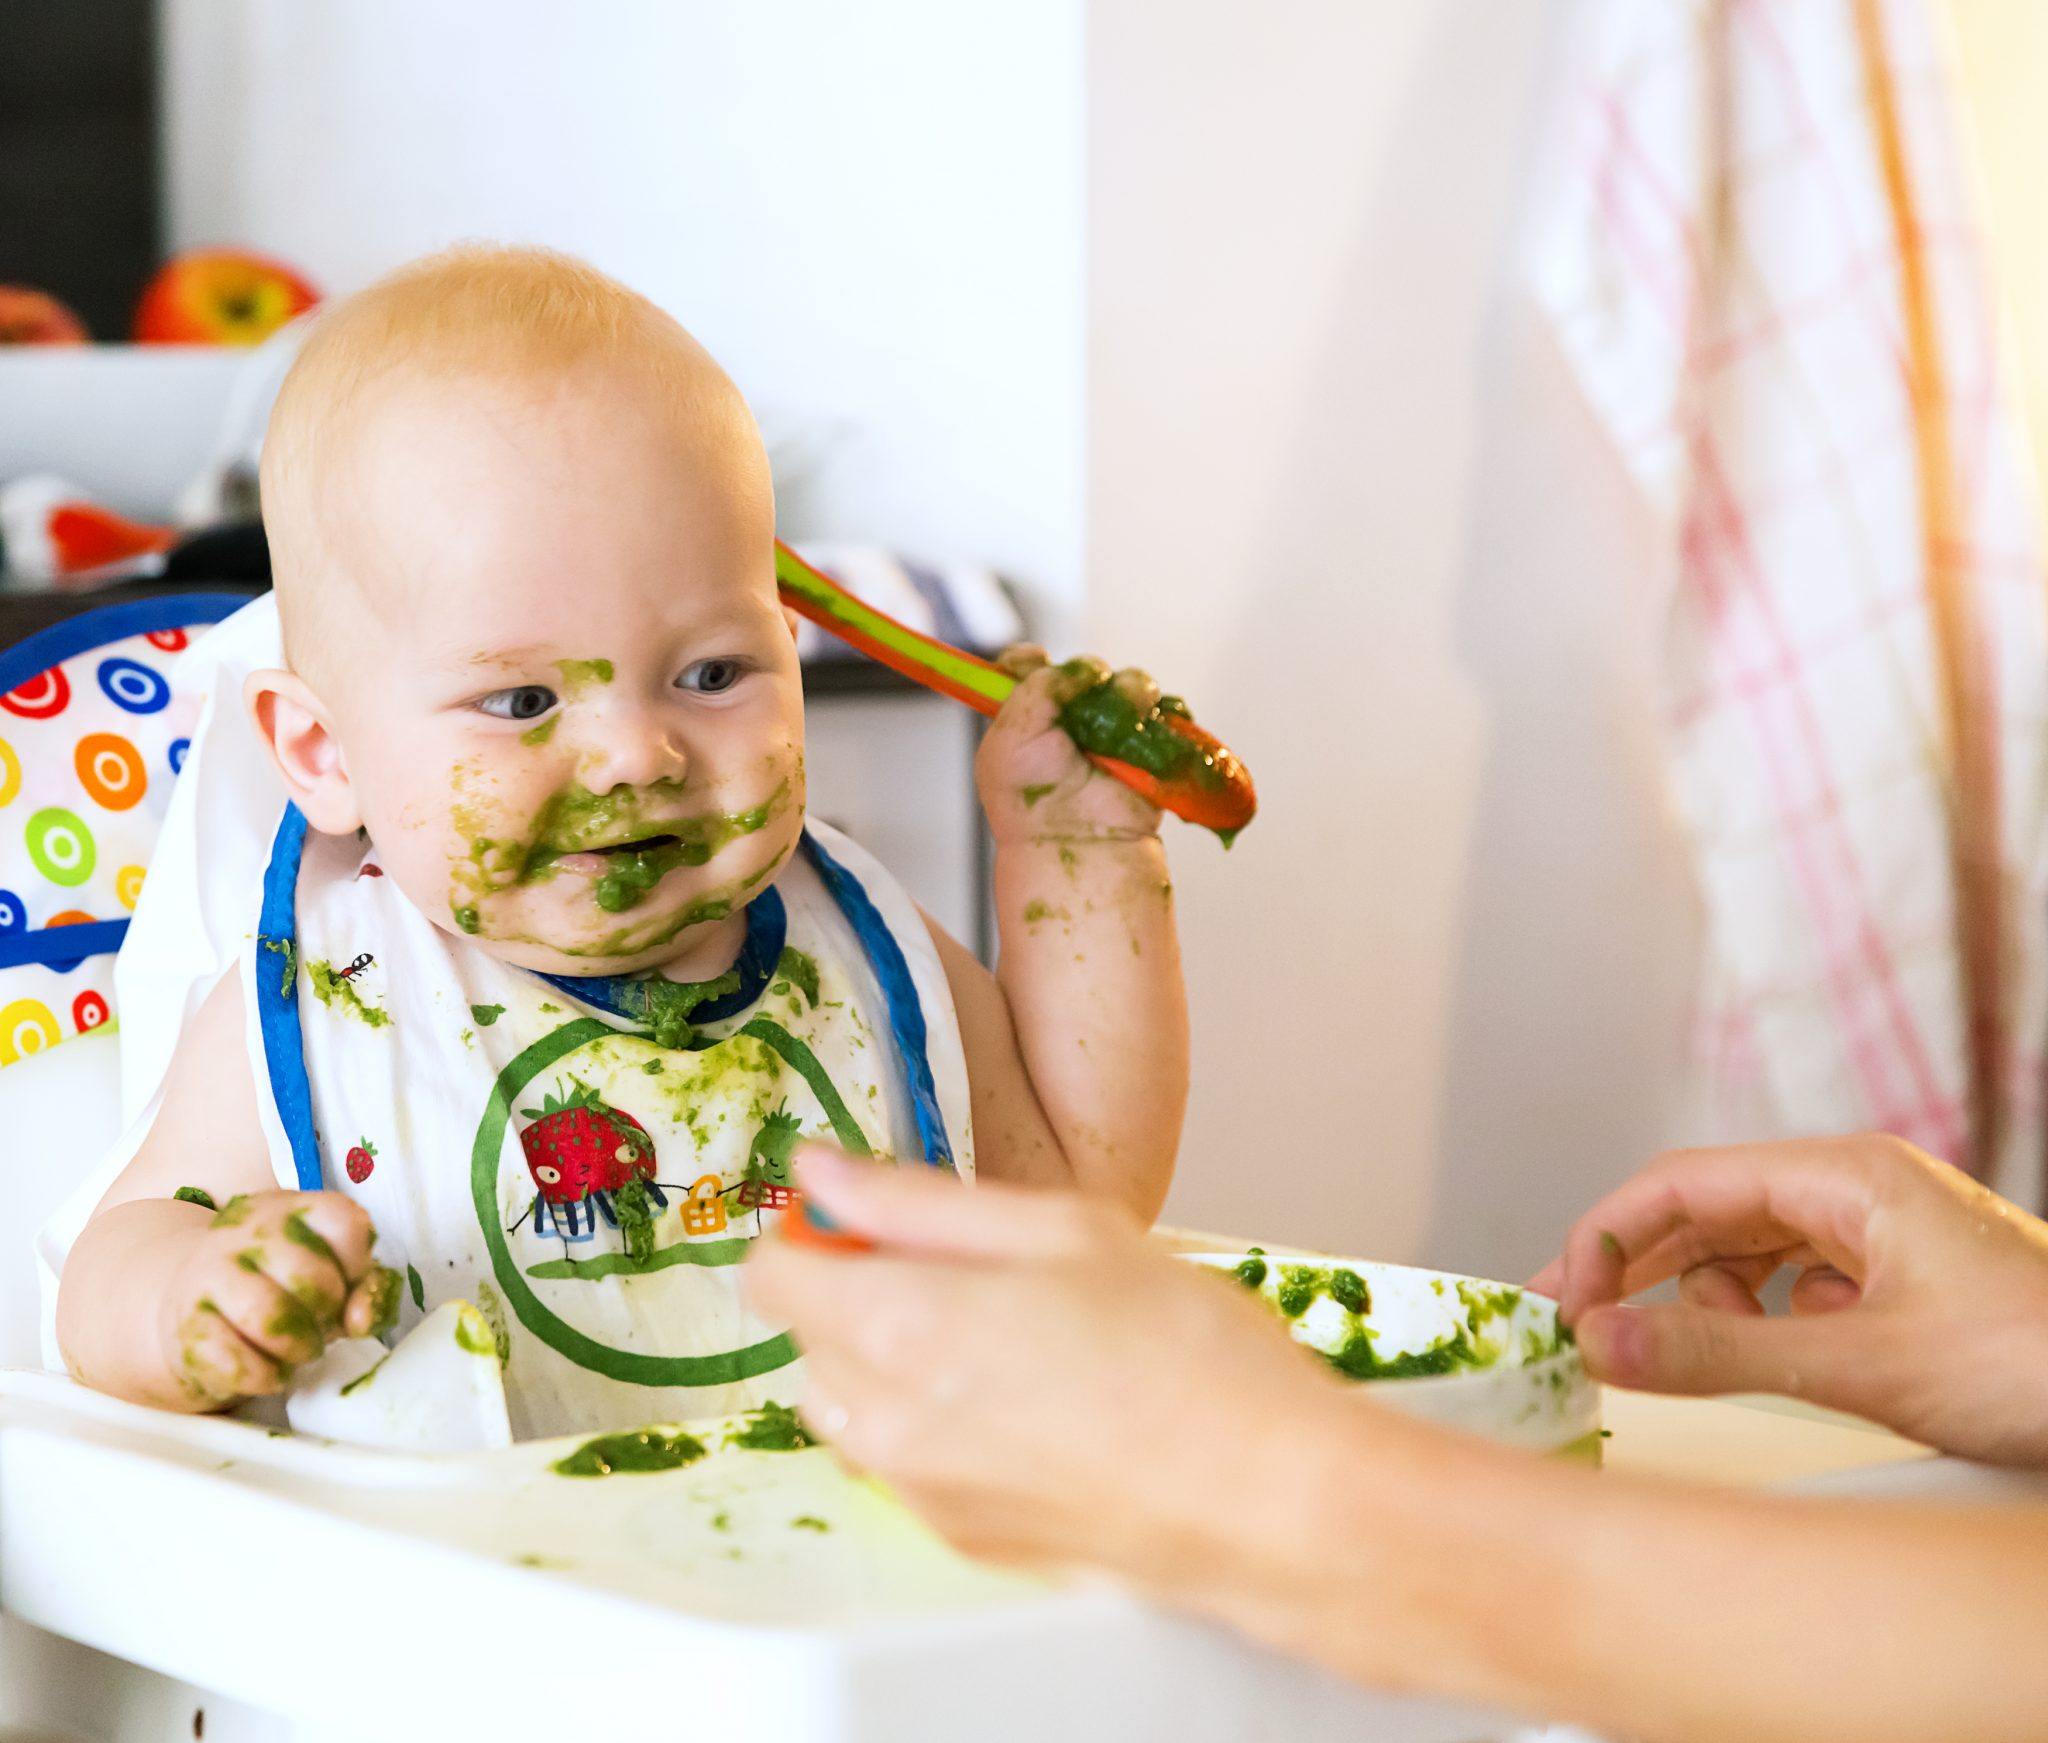 Yummy-yummy baby weaning guide or how to create a good eater